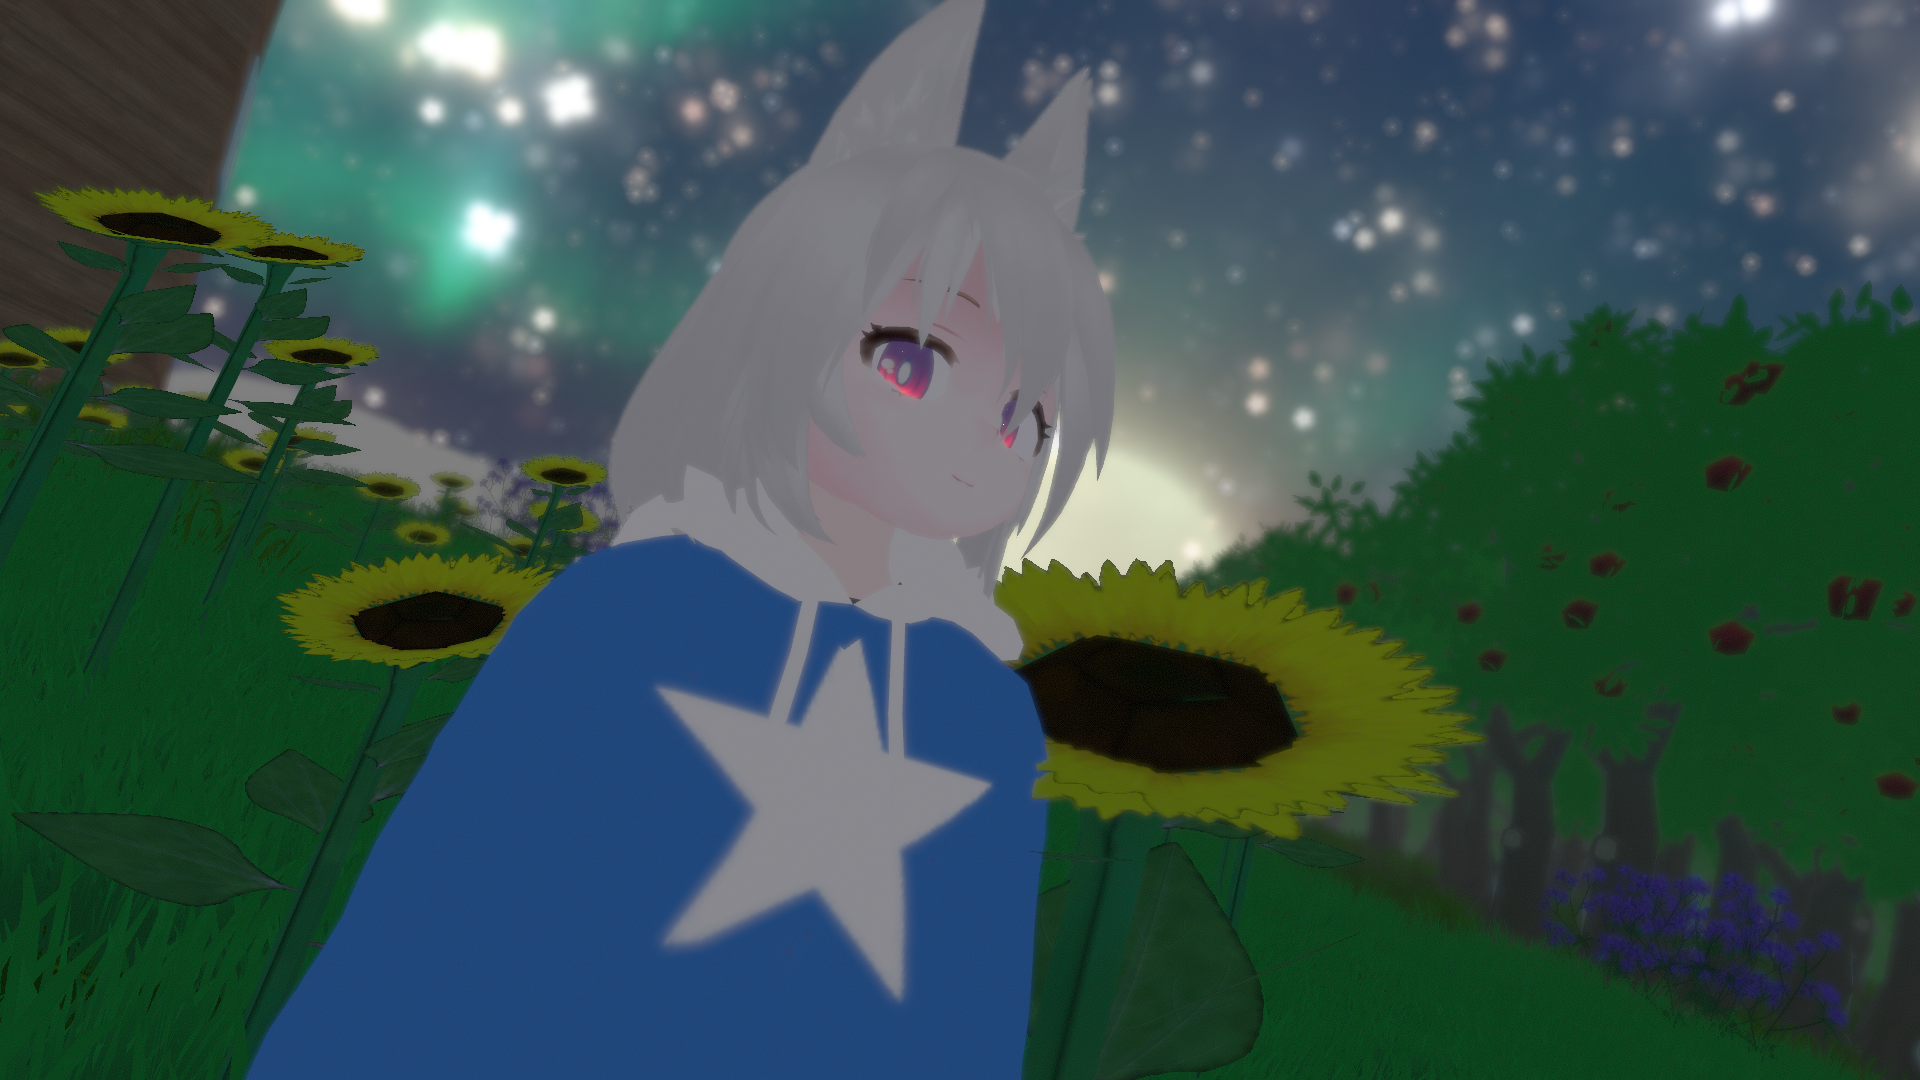 Me at VRChat (Photoed by Natsume)